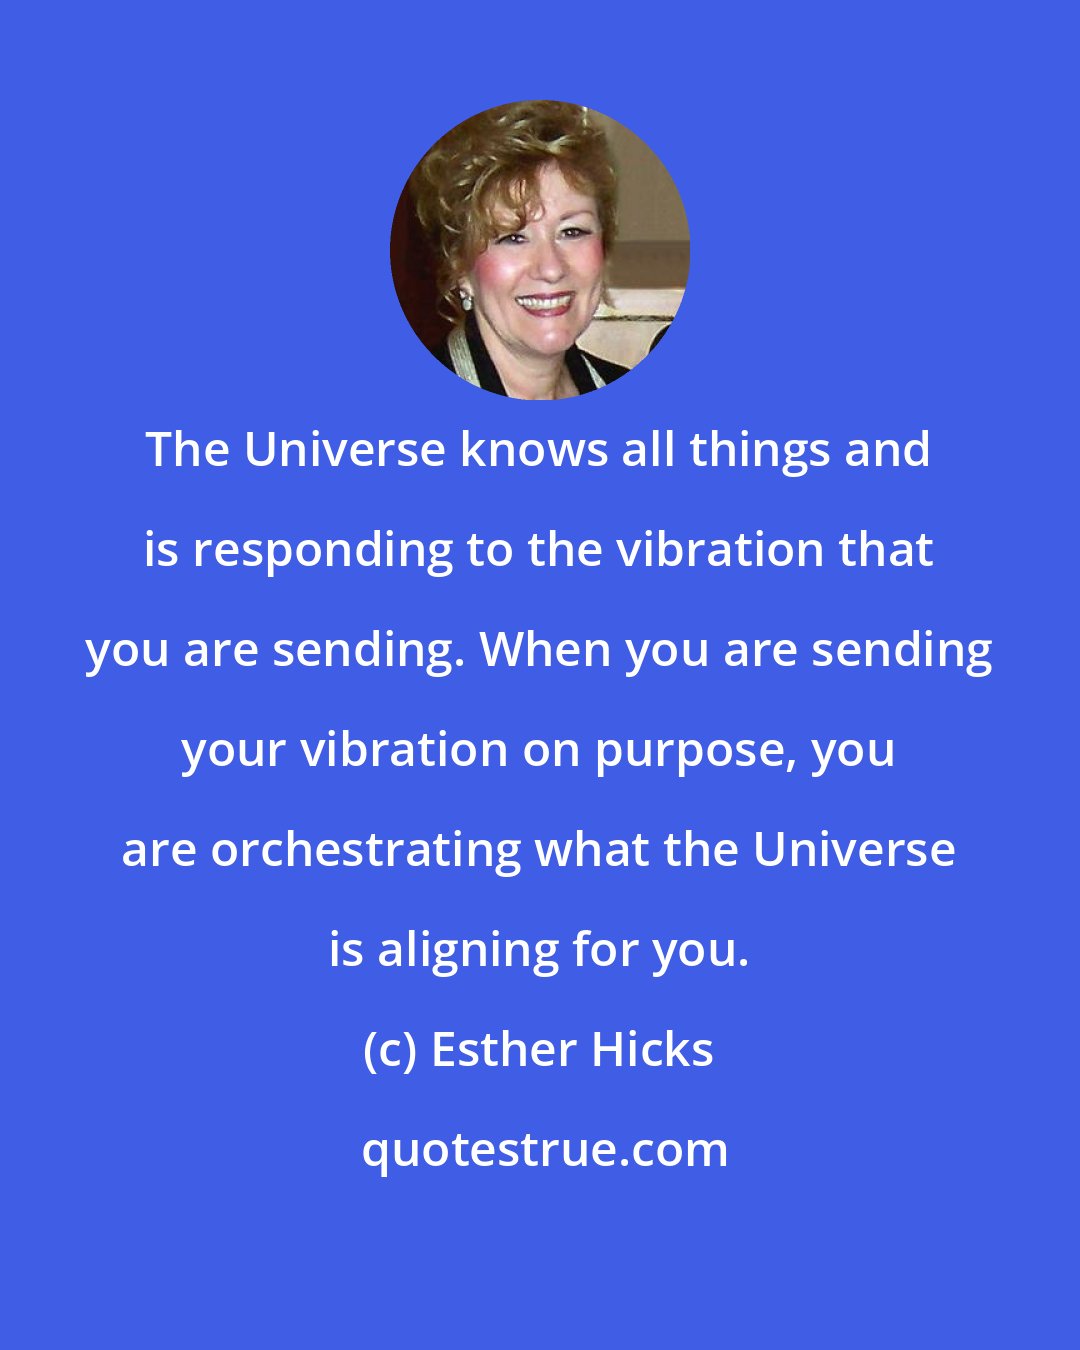 Esther Hicks: The Universe knows all things and is responding to the vibration that you are sending. When you are sending your vibration on purpose, you are orchestrating what the Universe is aligning for you.